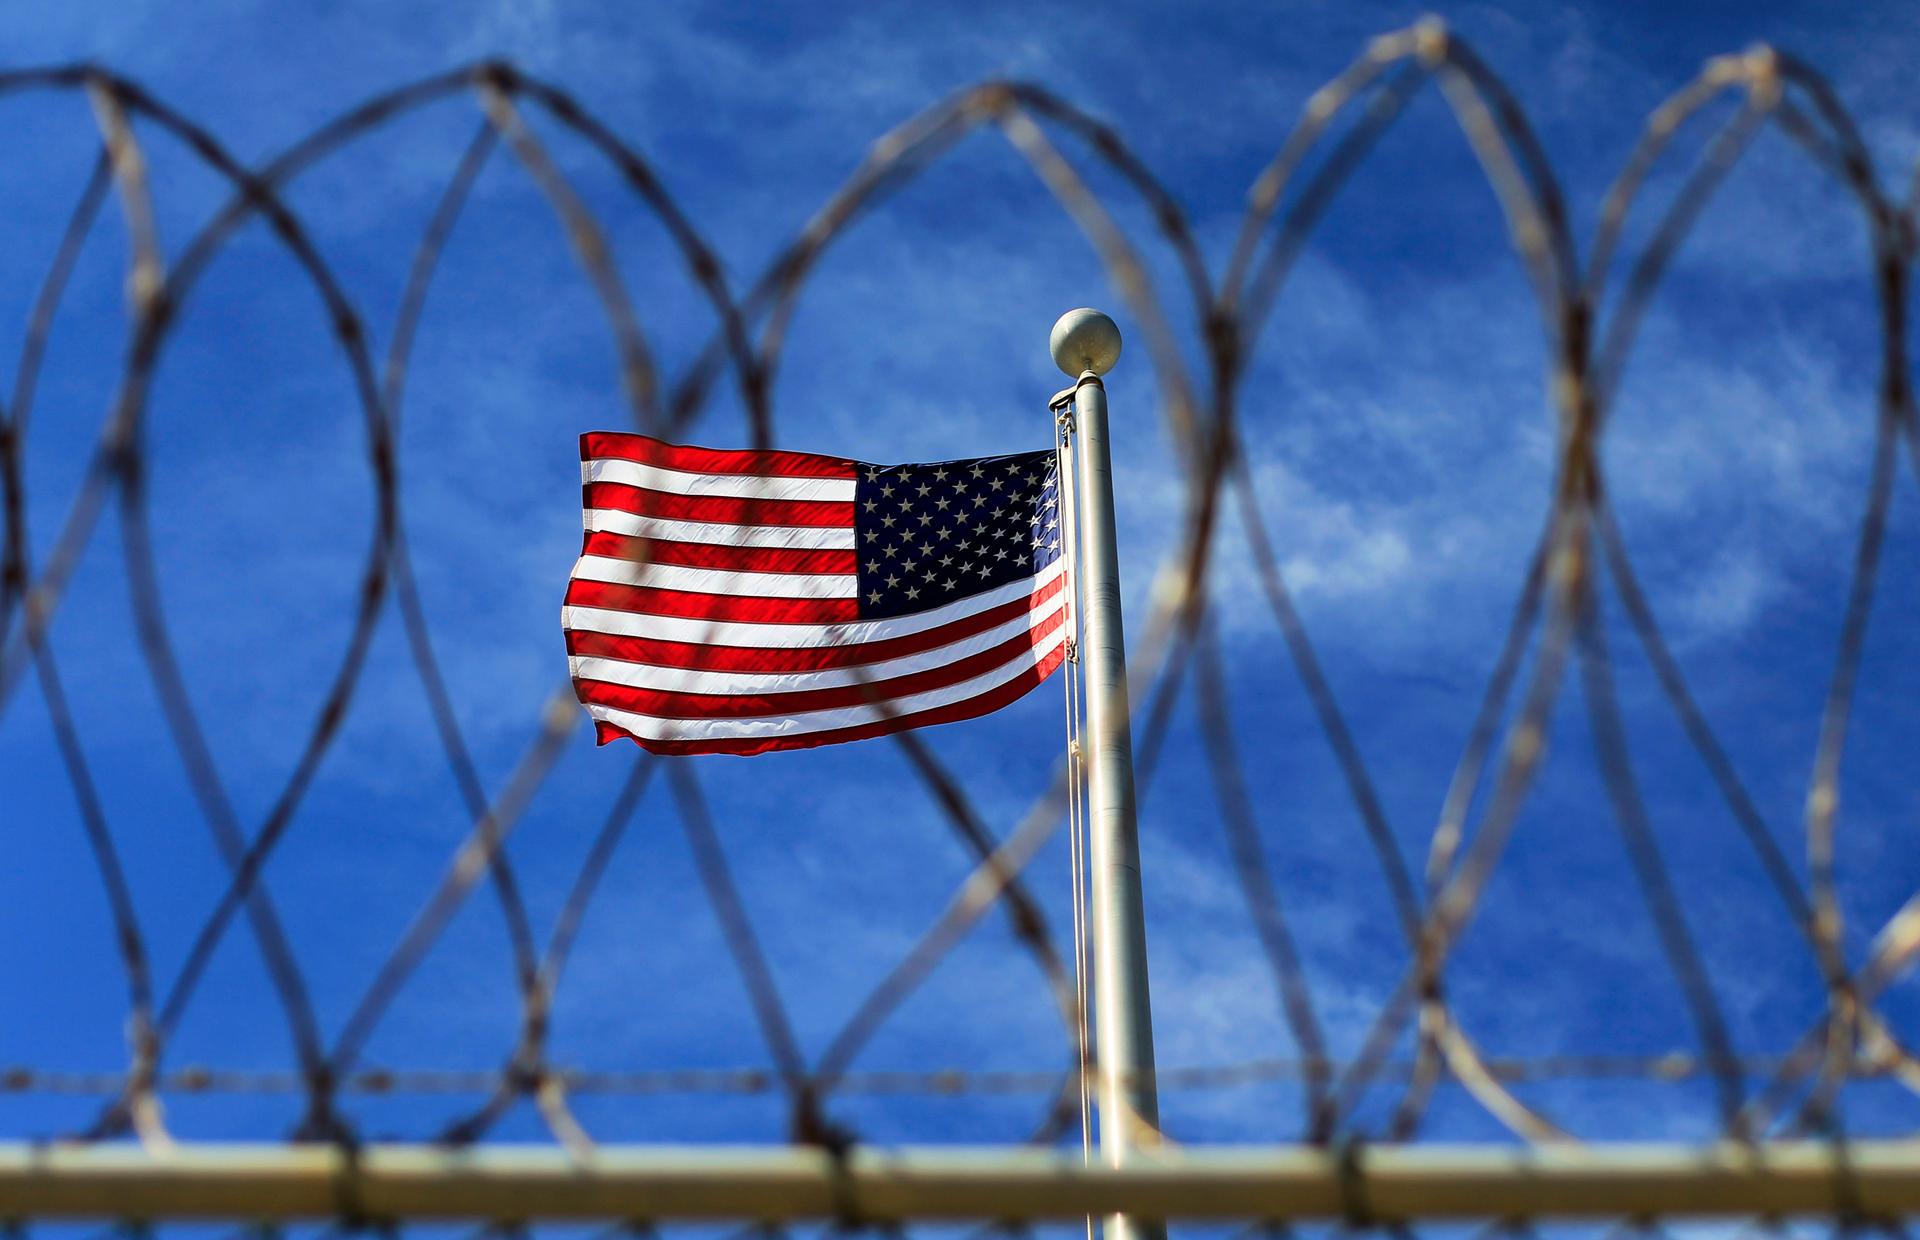 The U.S. flag flies over a prison used to house detainees at the U.S. Naval Base at Guantanamo Bay. The facility now holds around 150 prisoners who have been captured in Afghanistan and elsewhere since the September 11, 2001 attacks.